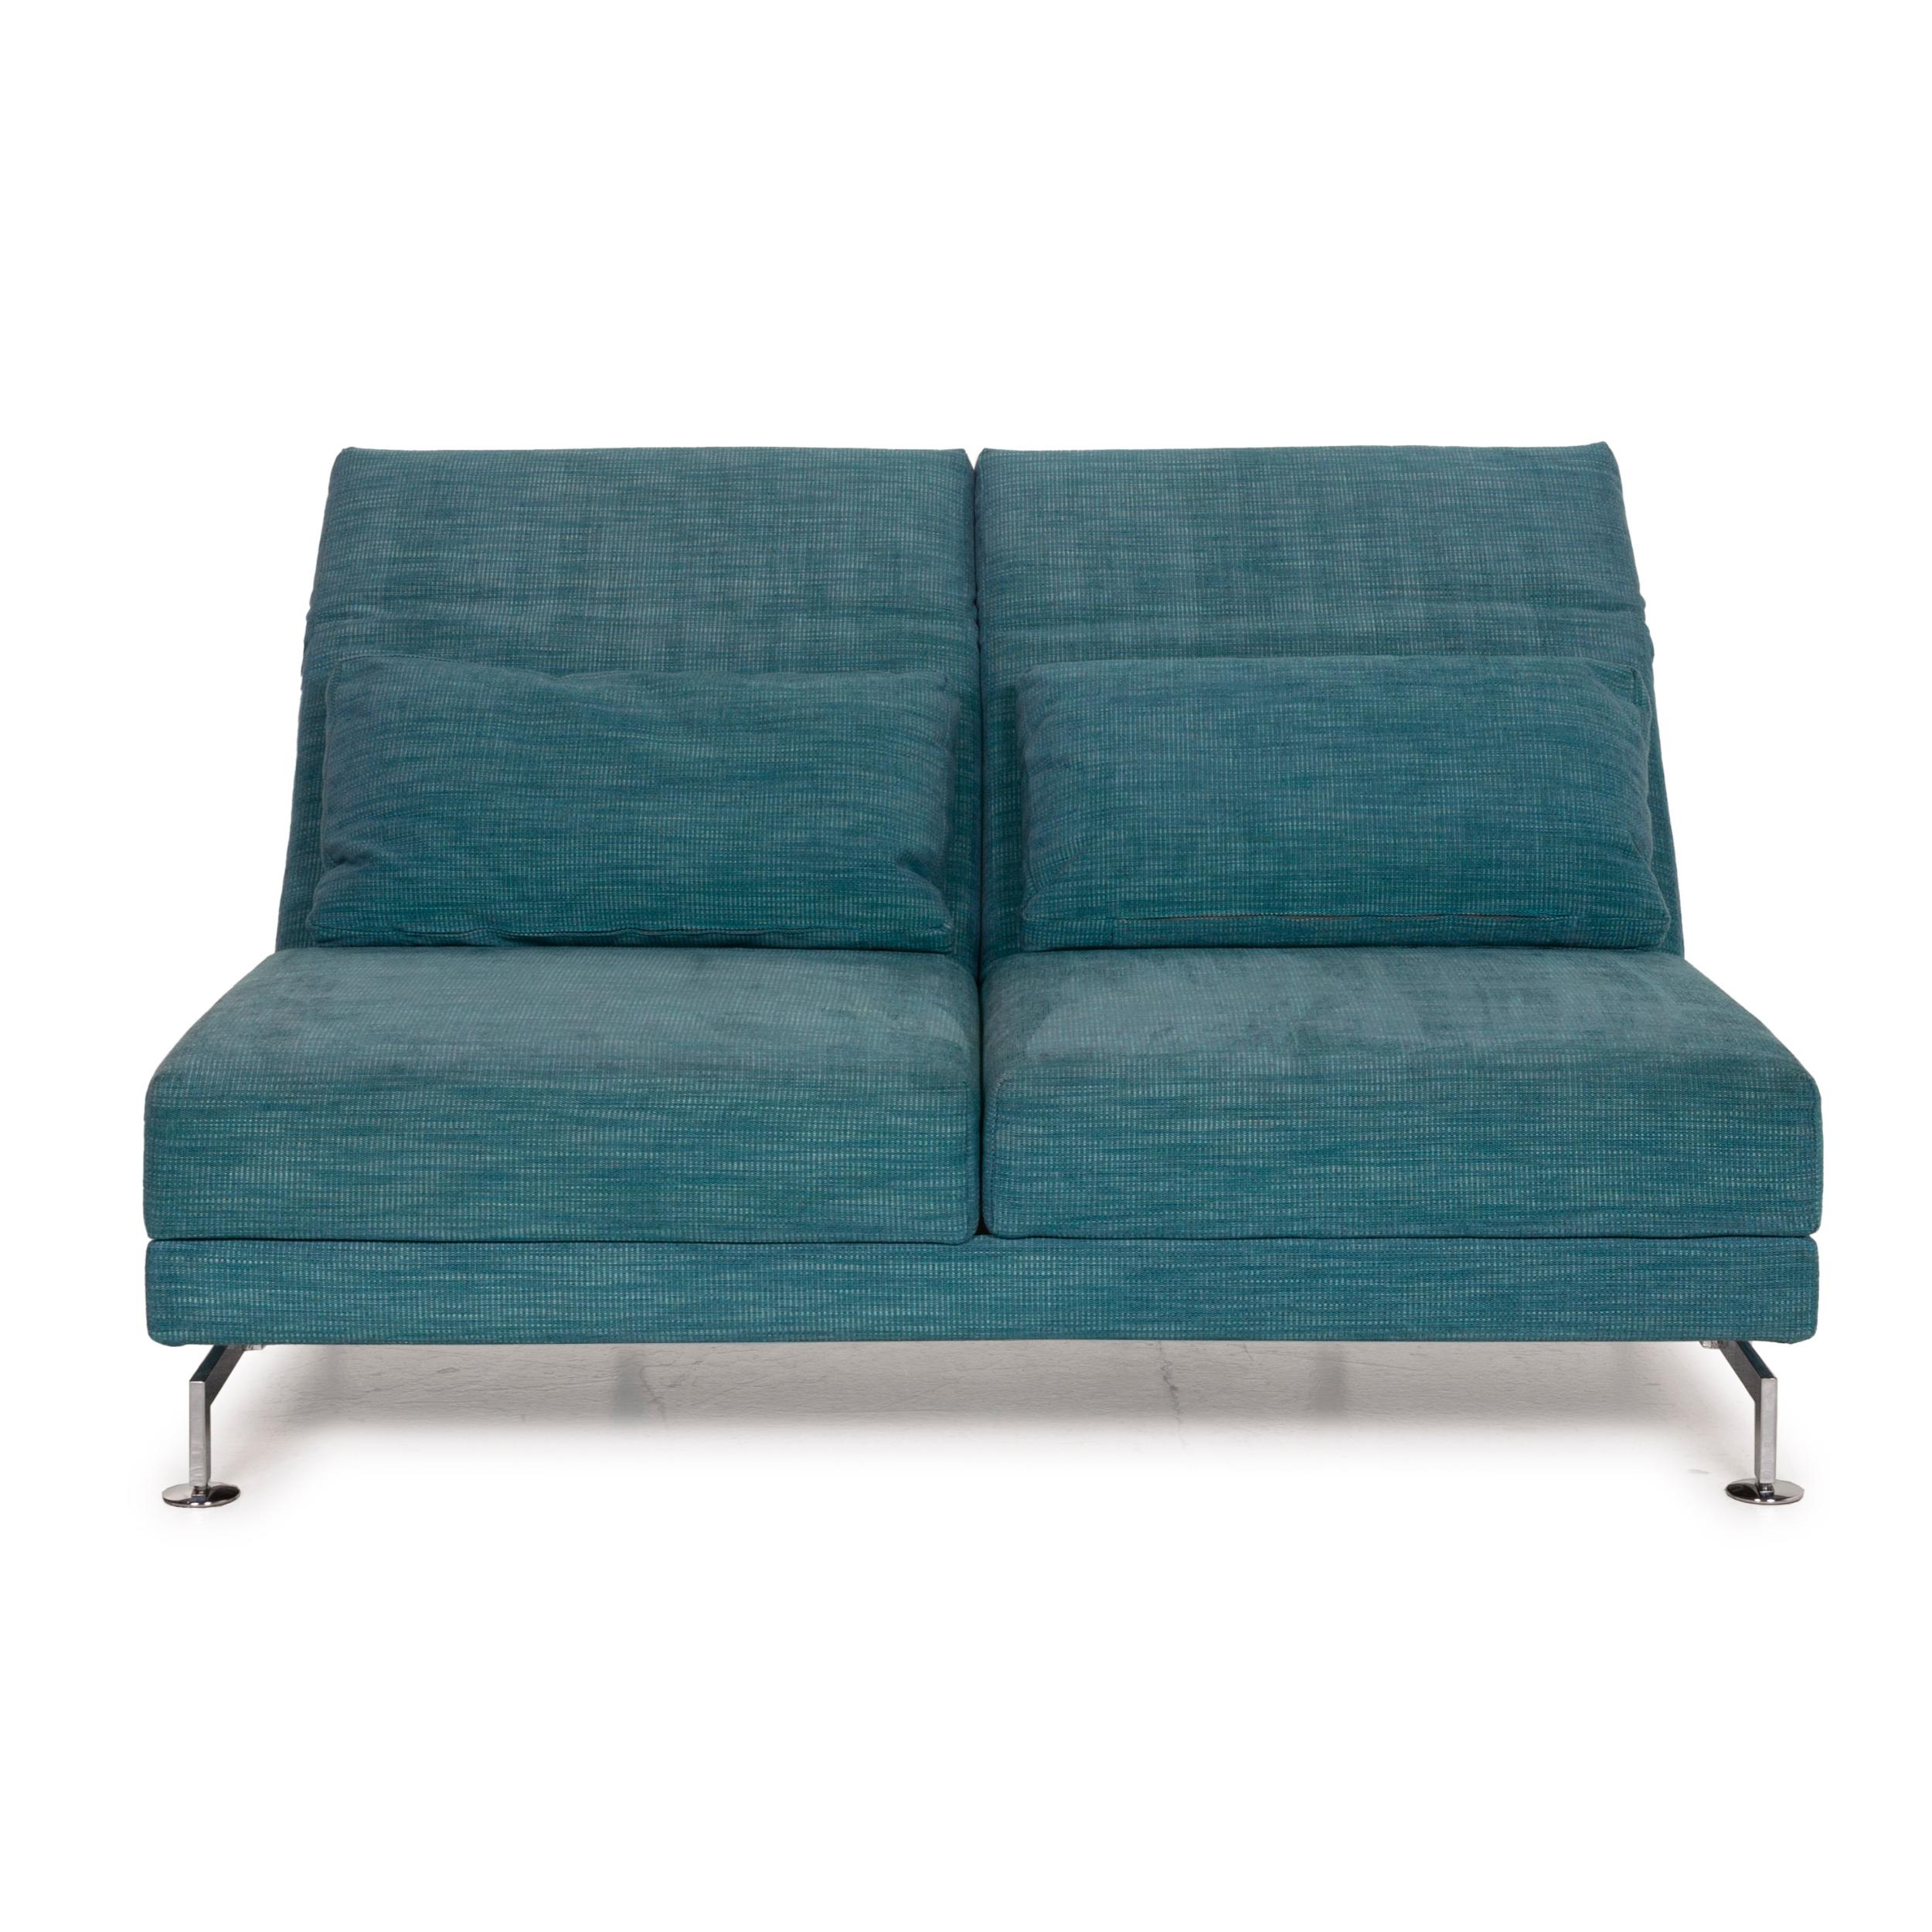 Brühl & Sippold Moule Fabric Sofa Blue Two-Seater Reclining Function Turquoise For Sale 3